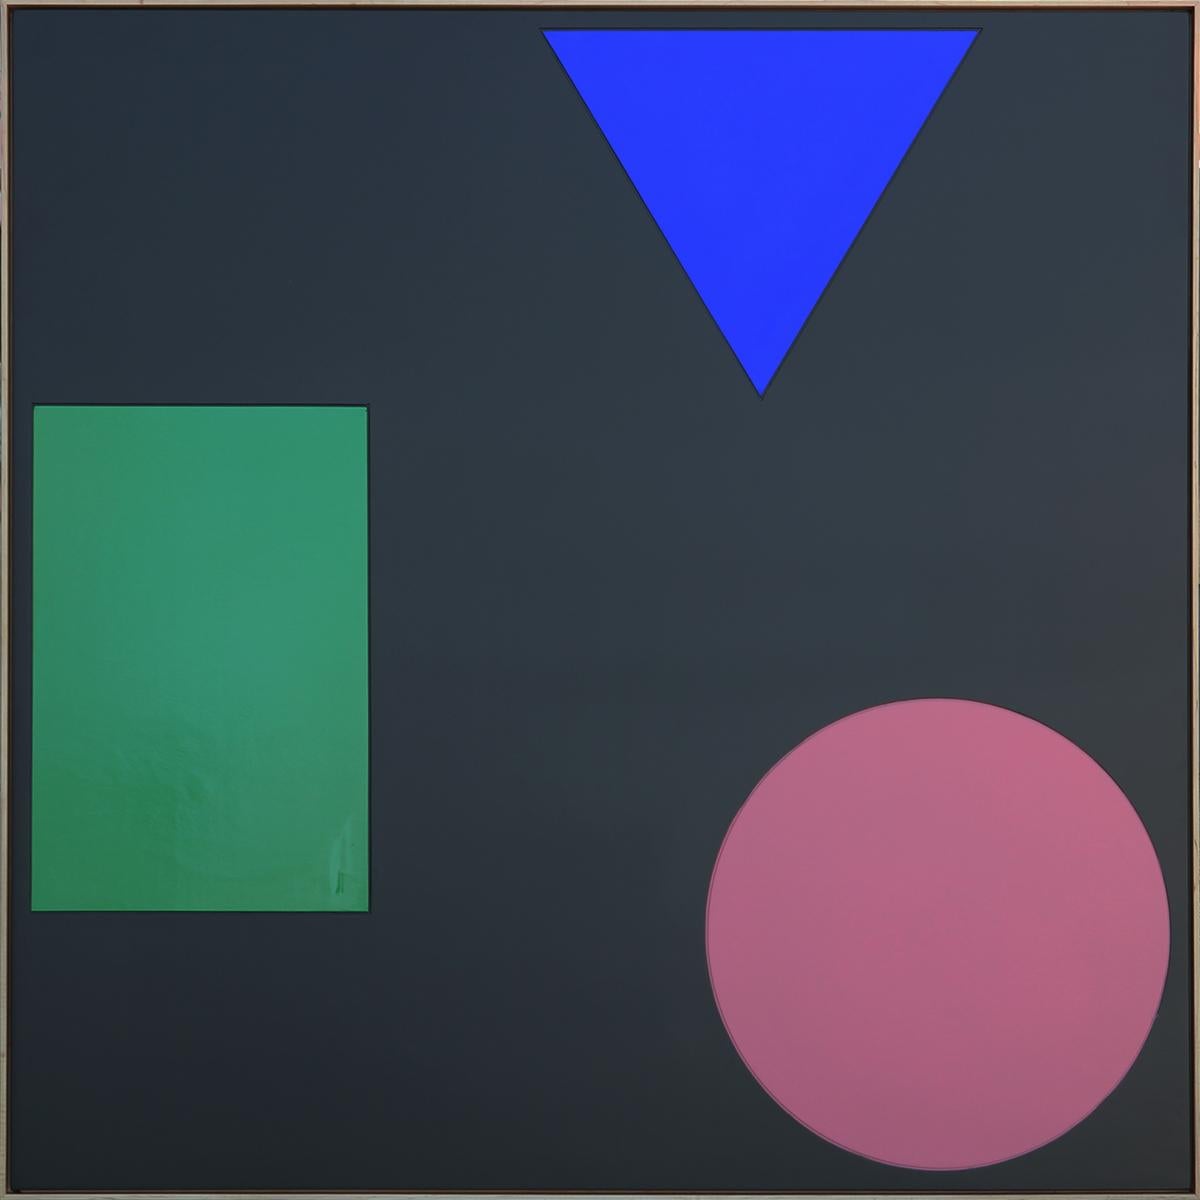 Matthew Reeves Abstract Painting - "RAD One" Green, Blue, Pink Abstract Geometric Triangle Modern Circle Painting